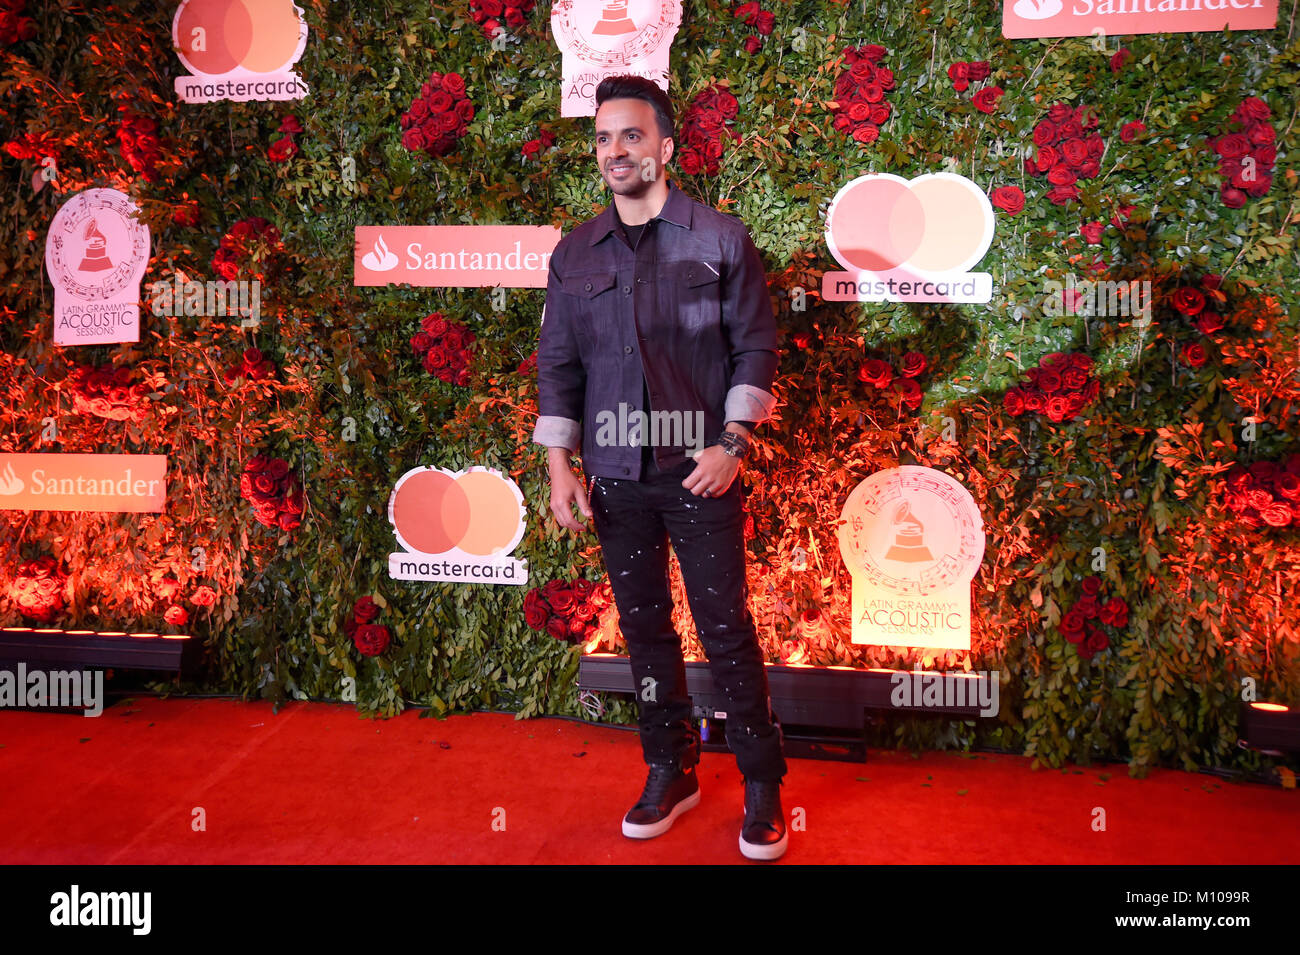 Mexico City, Mexico. 24th January, 2018.  Puerto Rico´s singer Luis Fonsi poses for photographers during the red carpet of the Latin Grammy Acoustic Session in Mexico City. Photo: Alejandra Gonzalez Credit: Alejandra Gonzalez/Alamy Live News Stock Photo